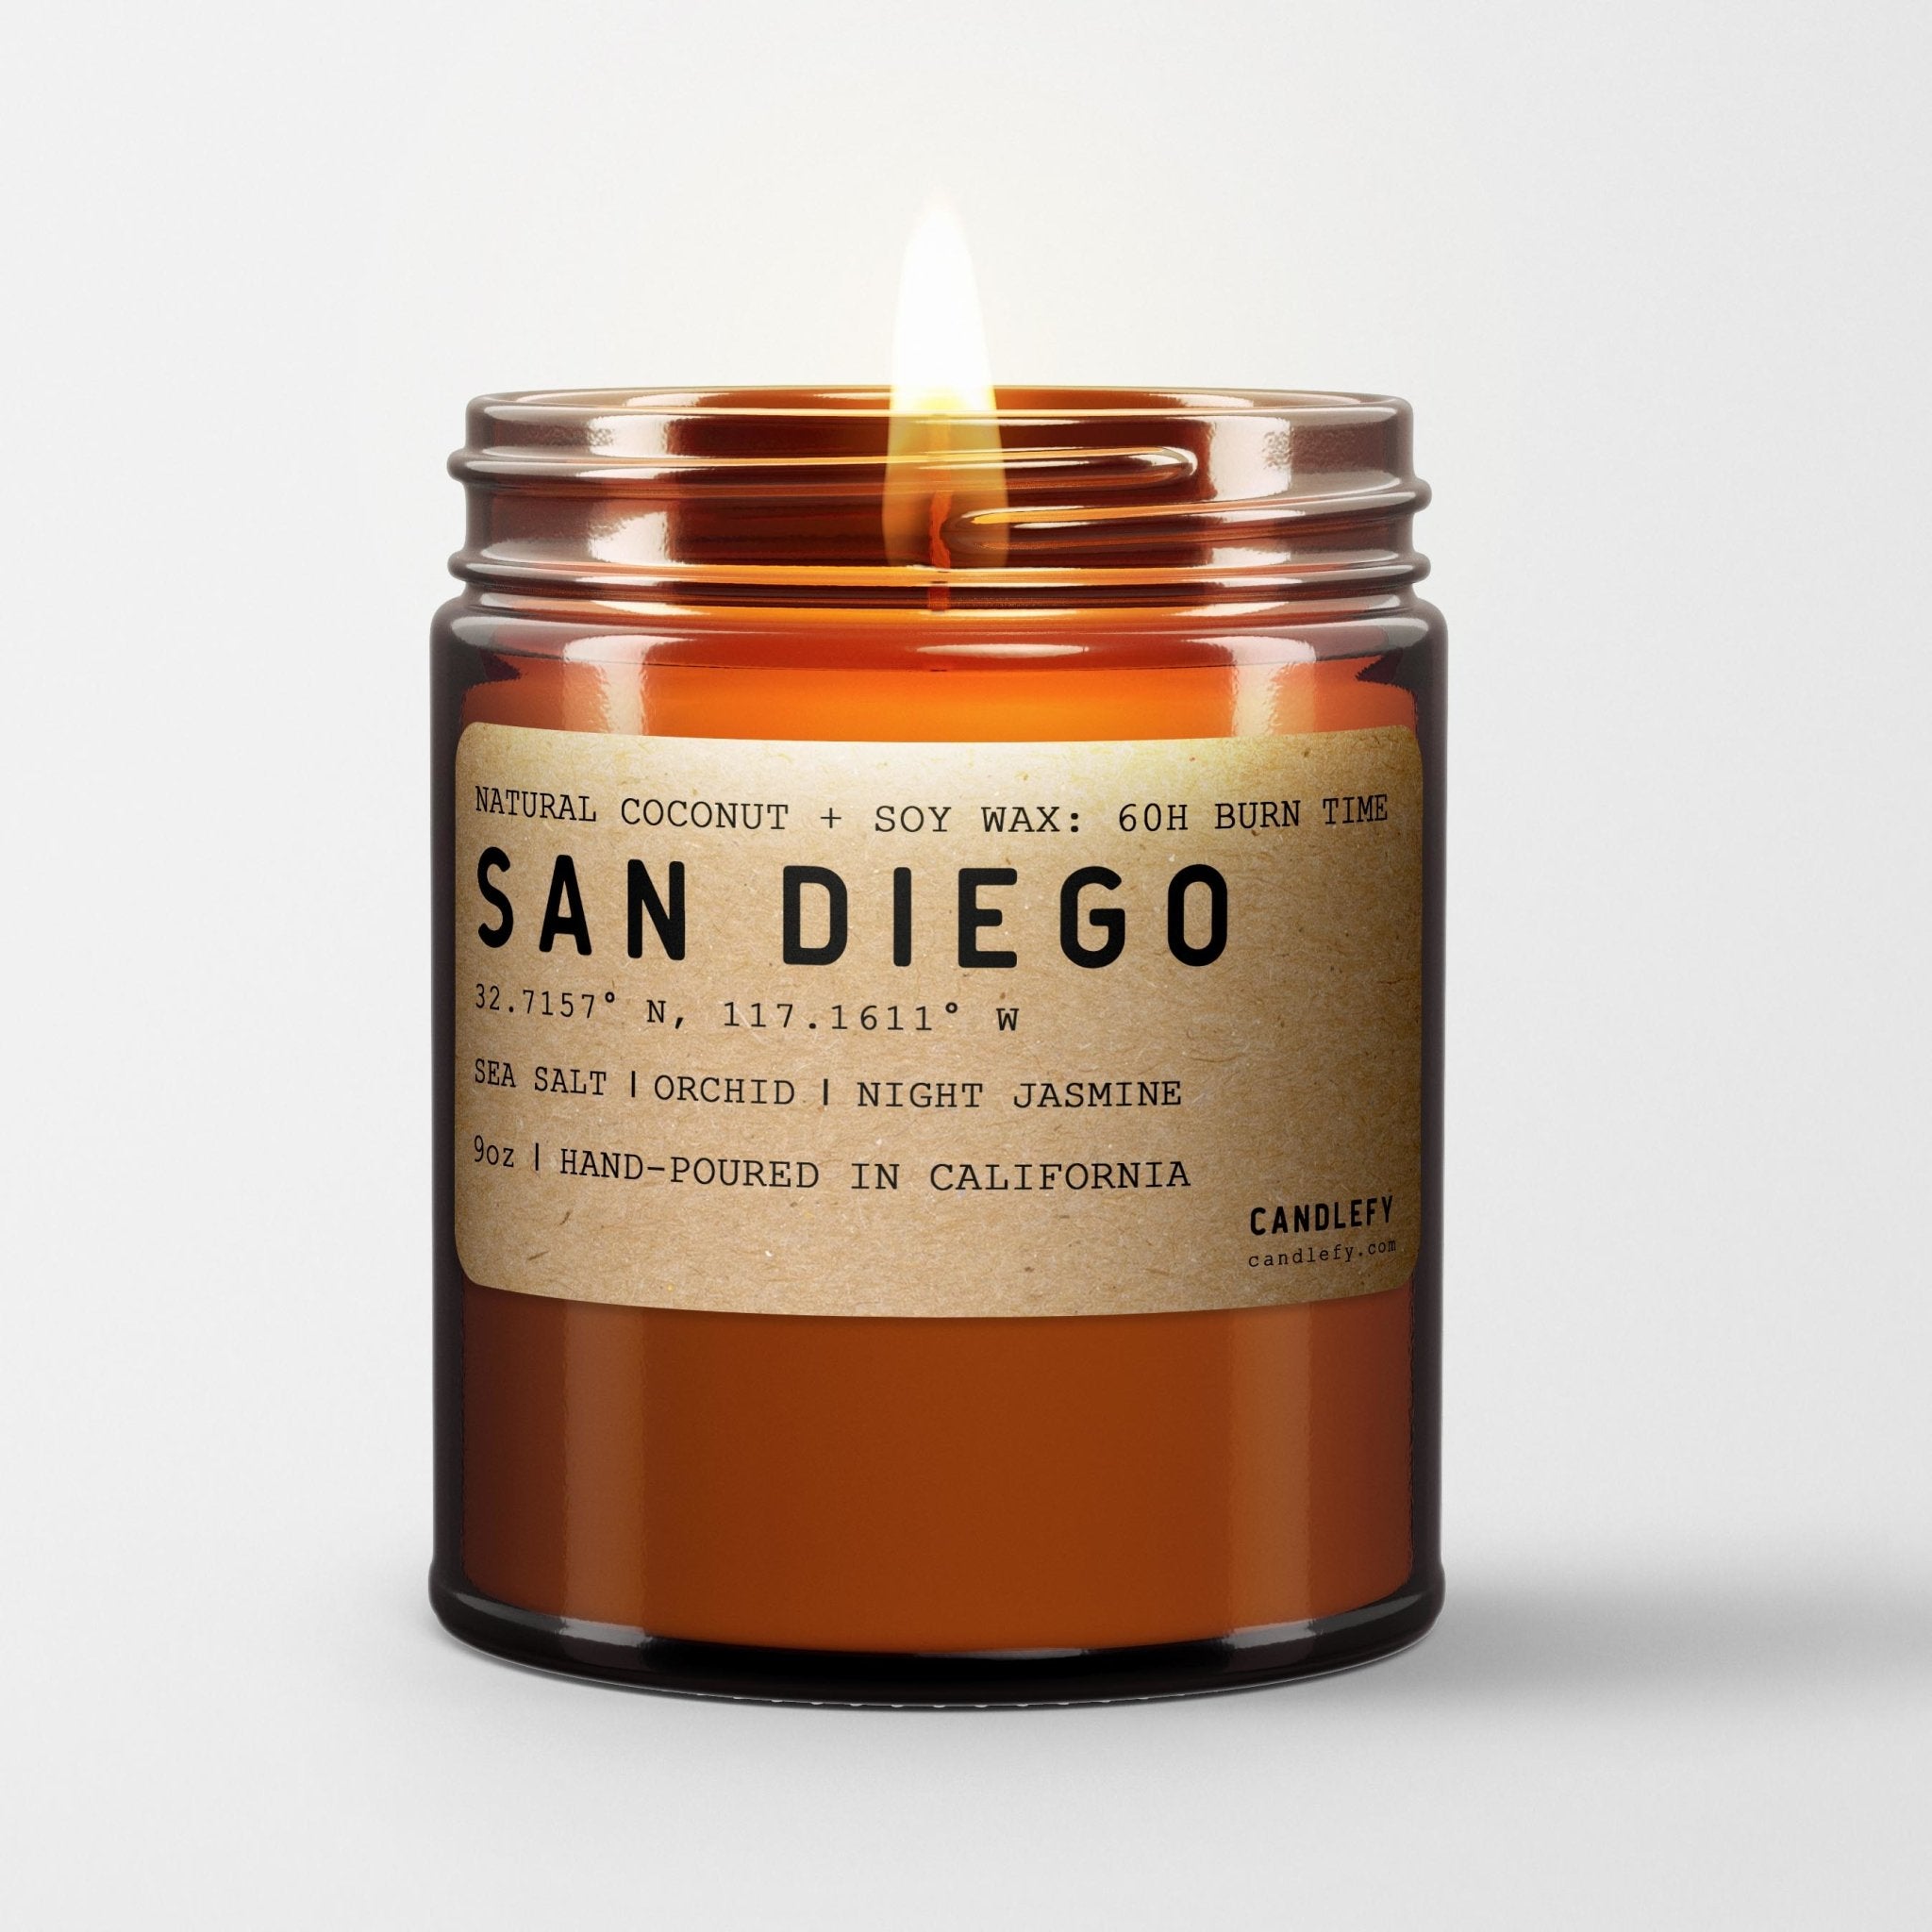 San Diego I California Scented Candle - Candlefy